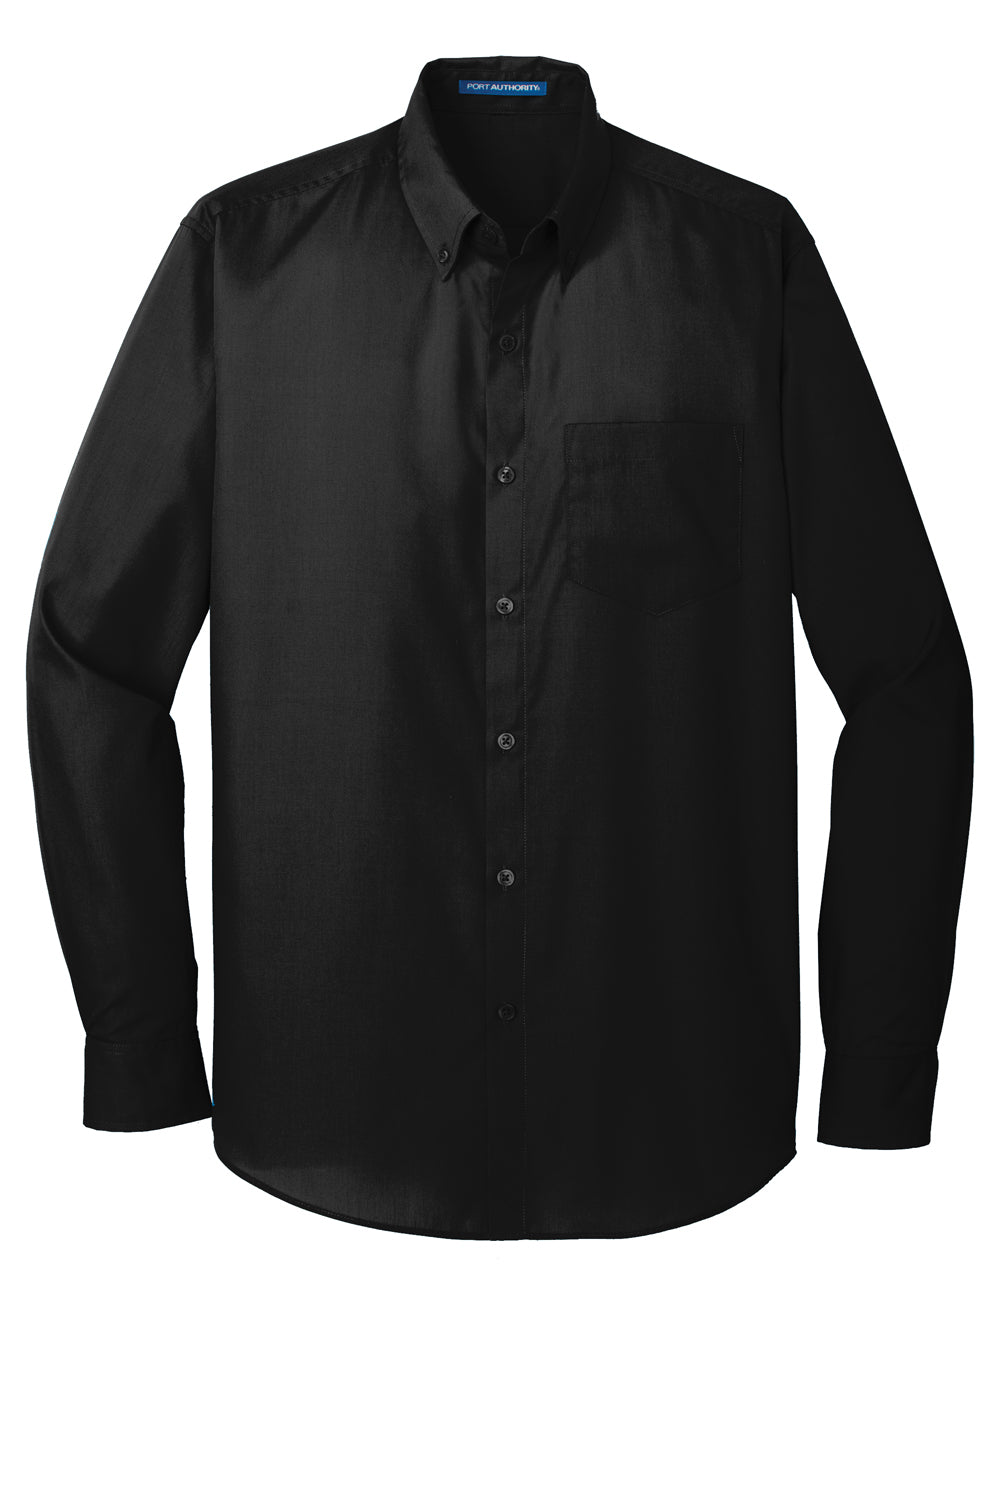 Port Authority W100/TW100 Carefree Stain Resistant Long Sleeve Button Down Shirt w/ Pocket Deep Black Flat Front